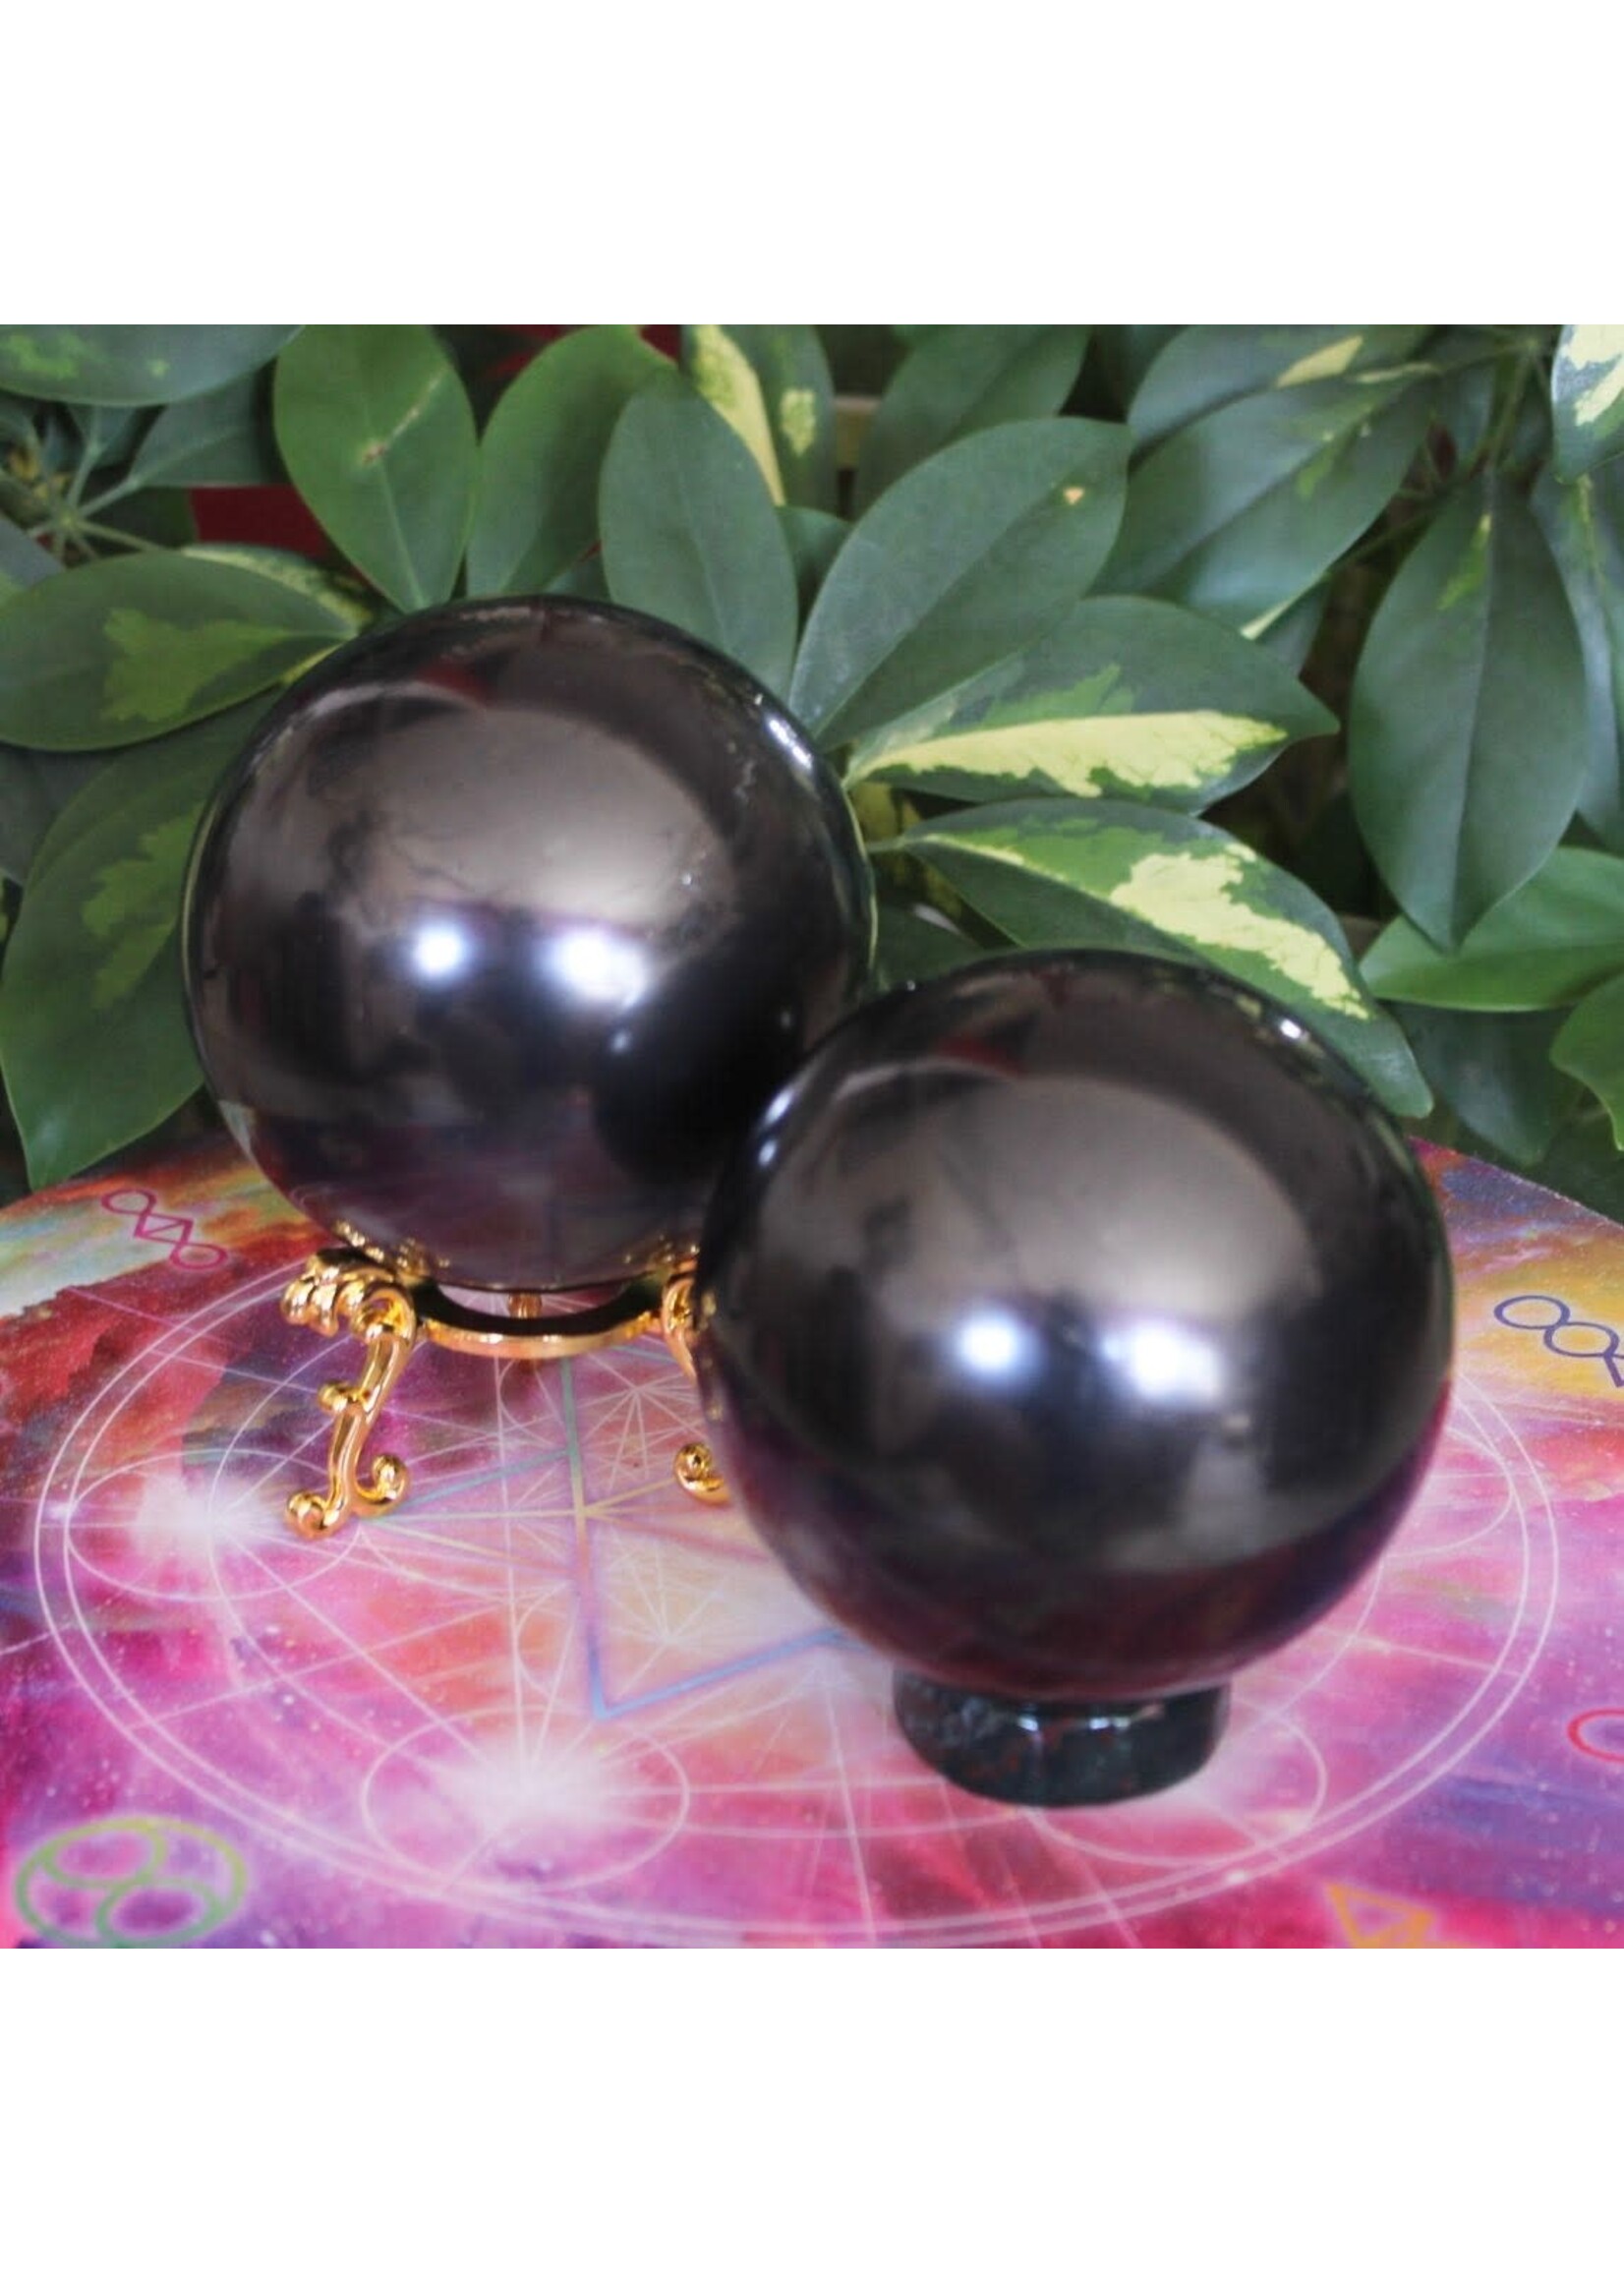 Shungite Spheres for potent clearing